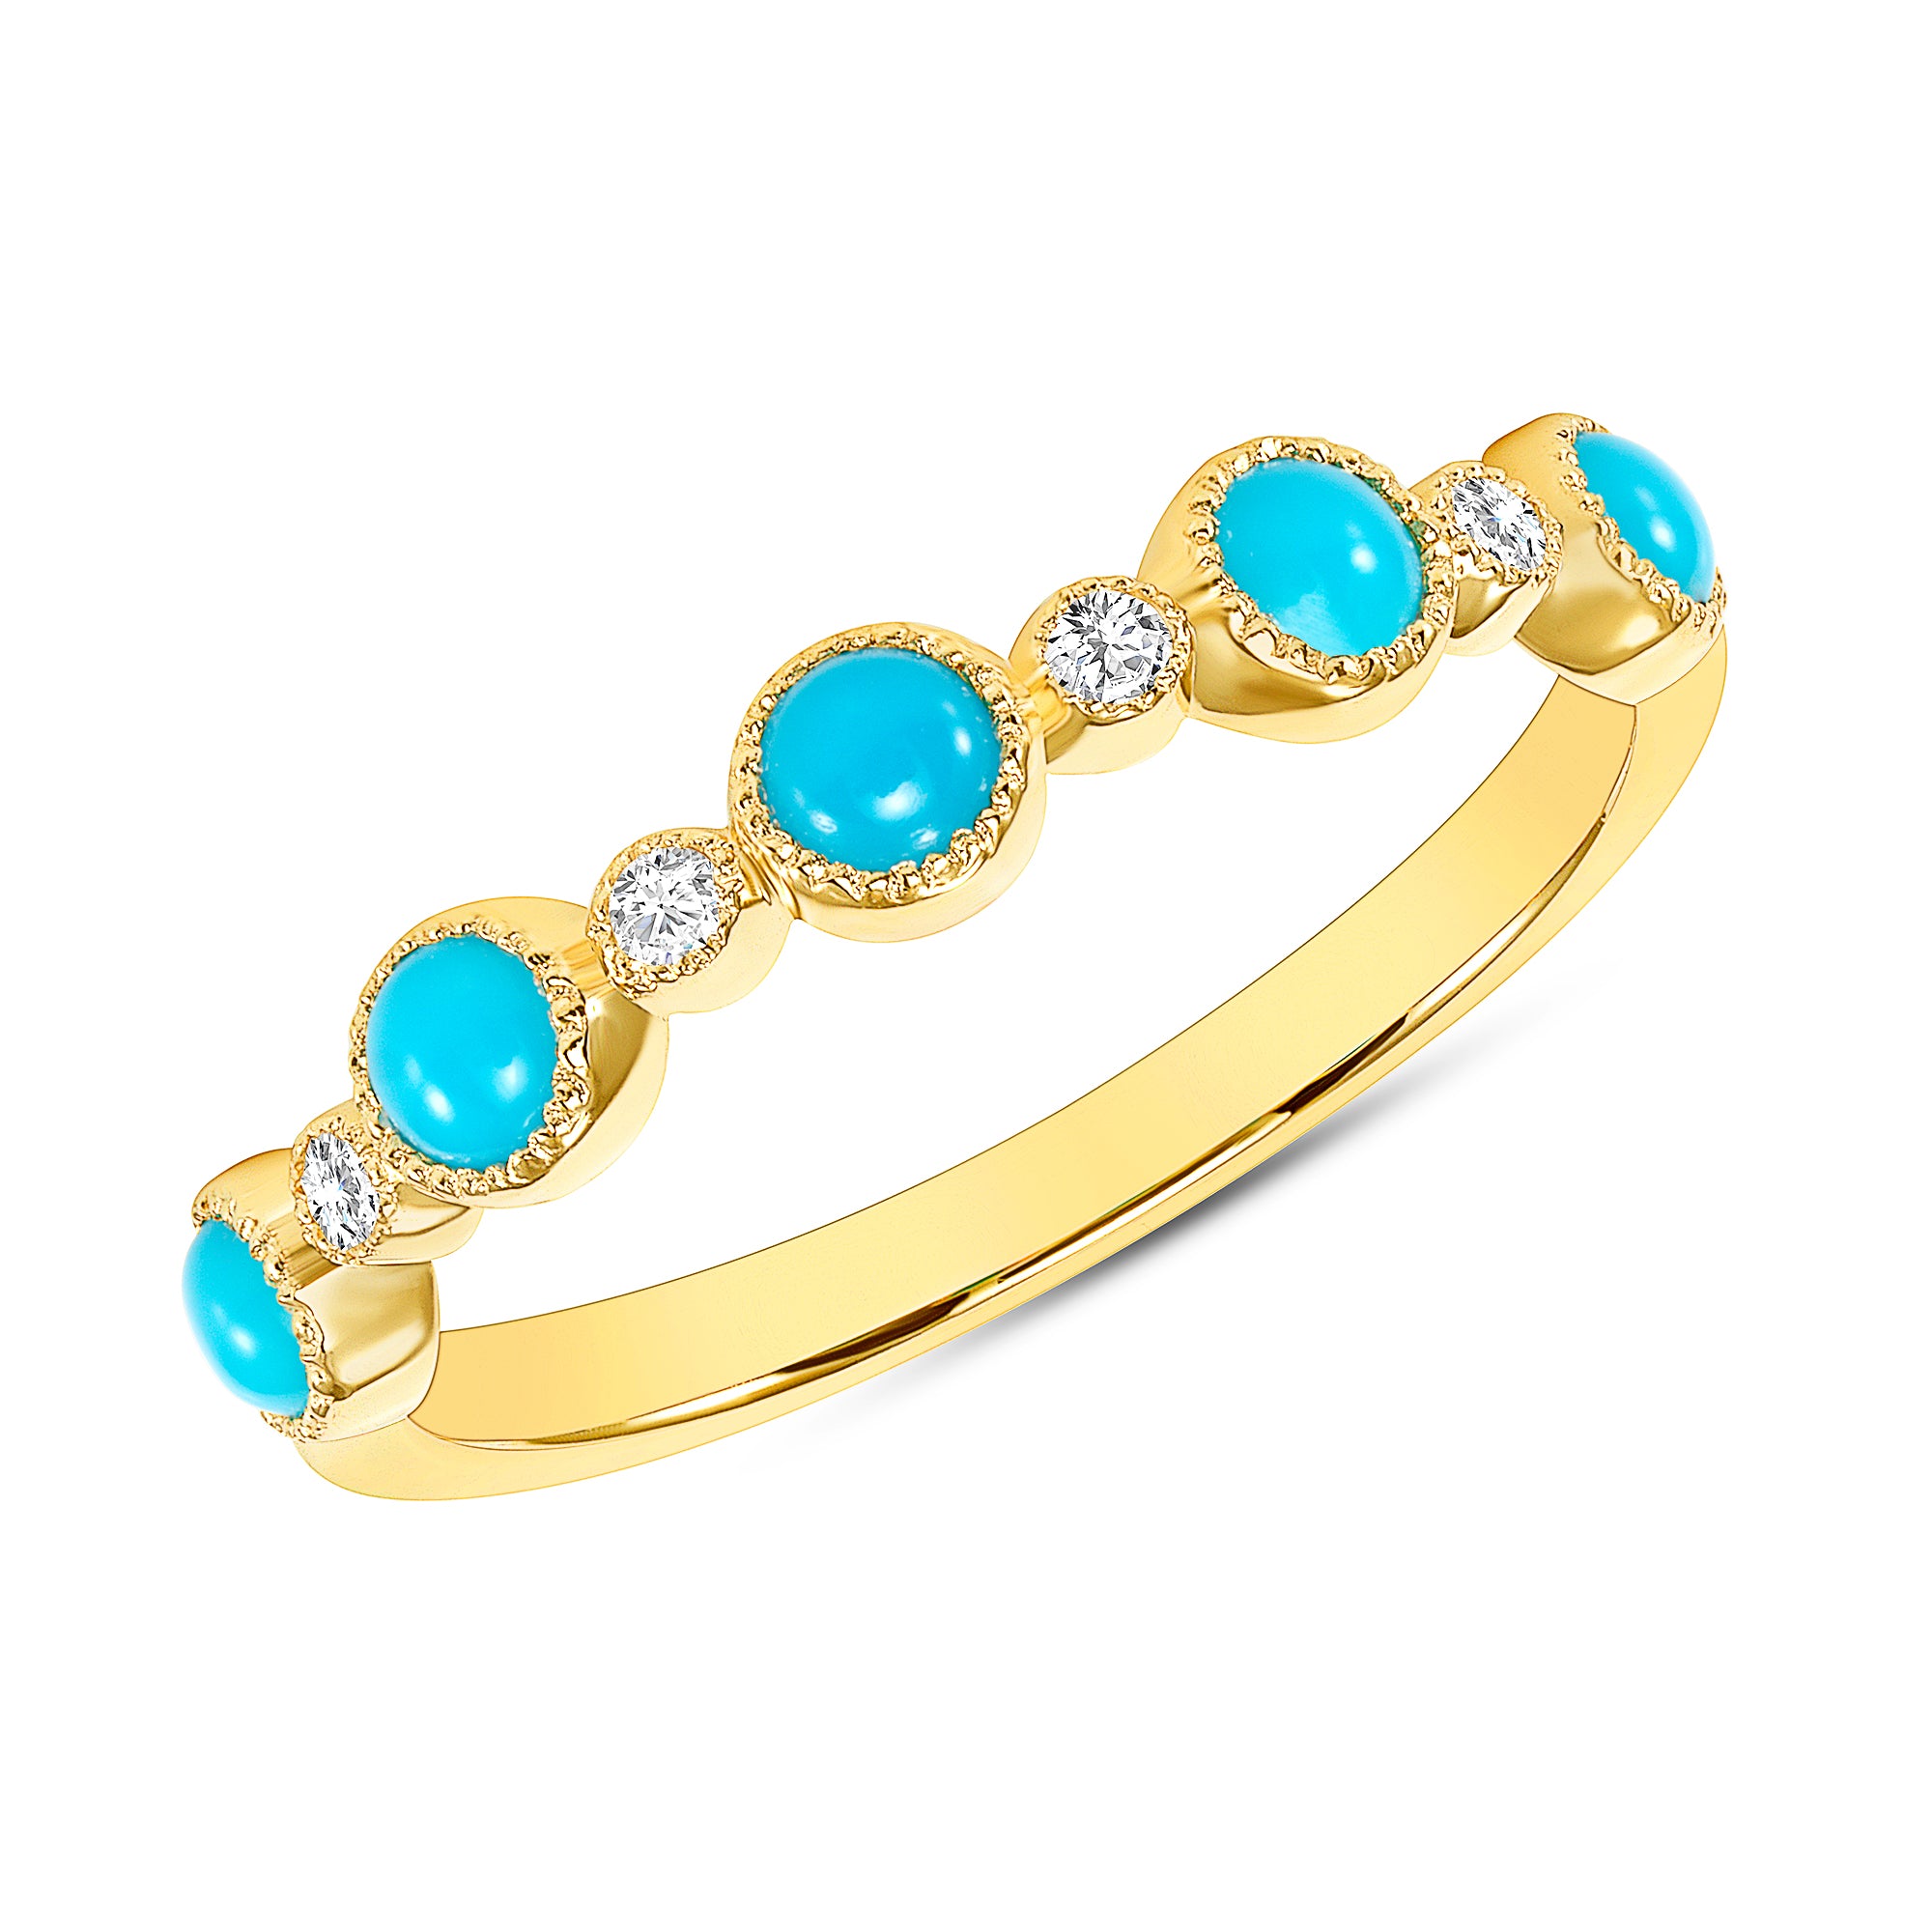 14k Alternate Diamond and Turquoise Bezel Set Stackable Ring Band,  Color Stones, ABB-104.1-TQD, Color Stones, turquoise and diamond bezel stacking ring, Belarino